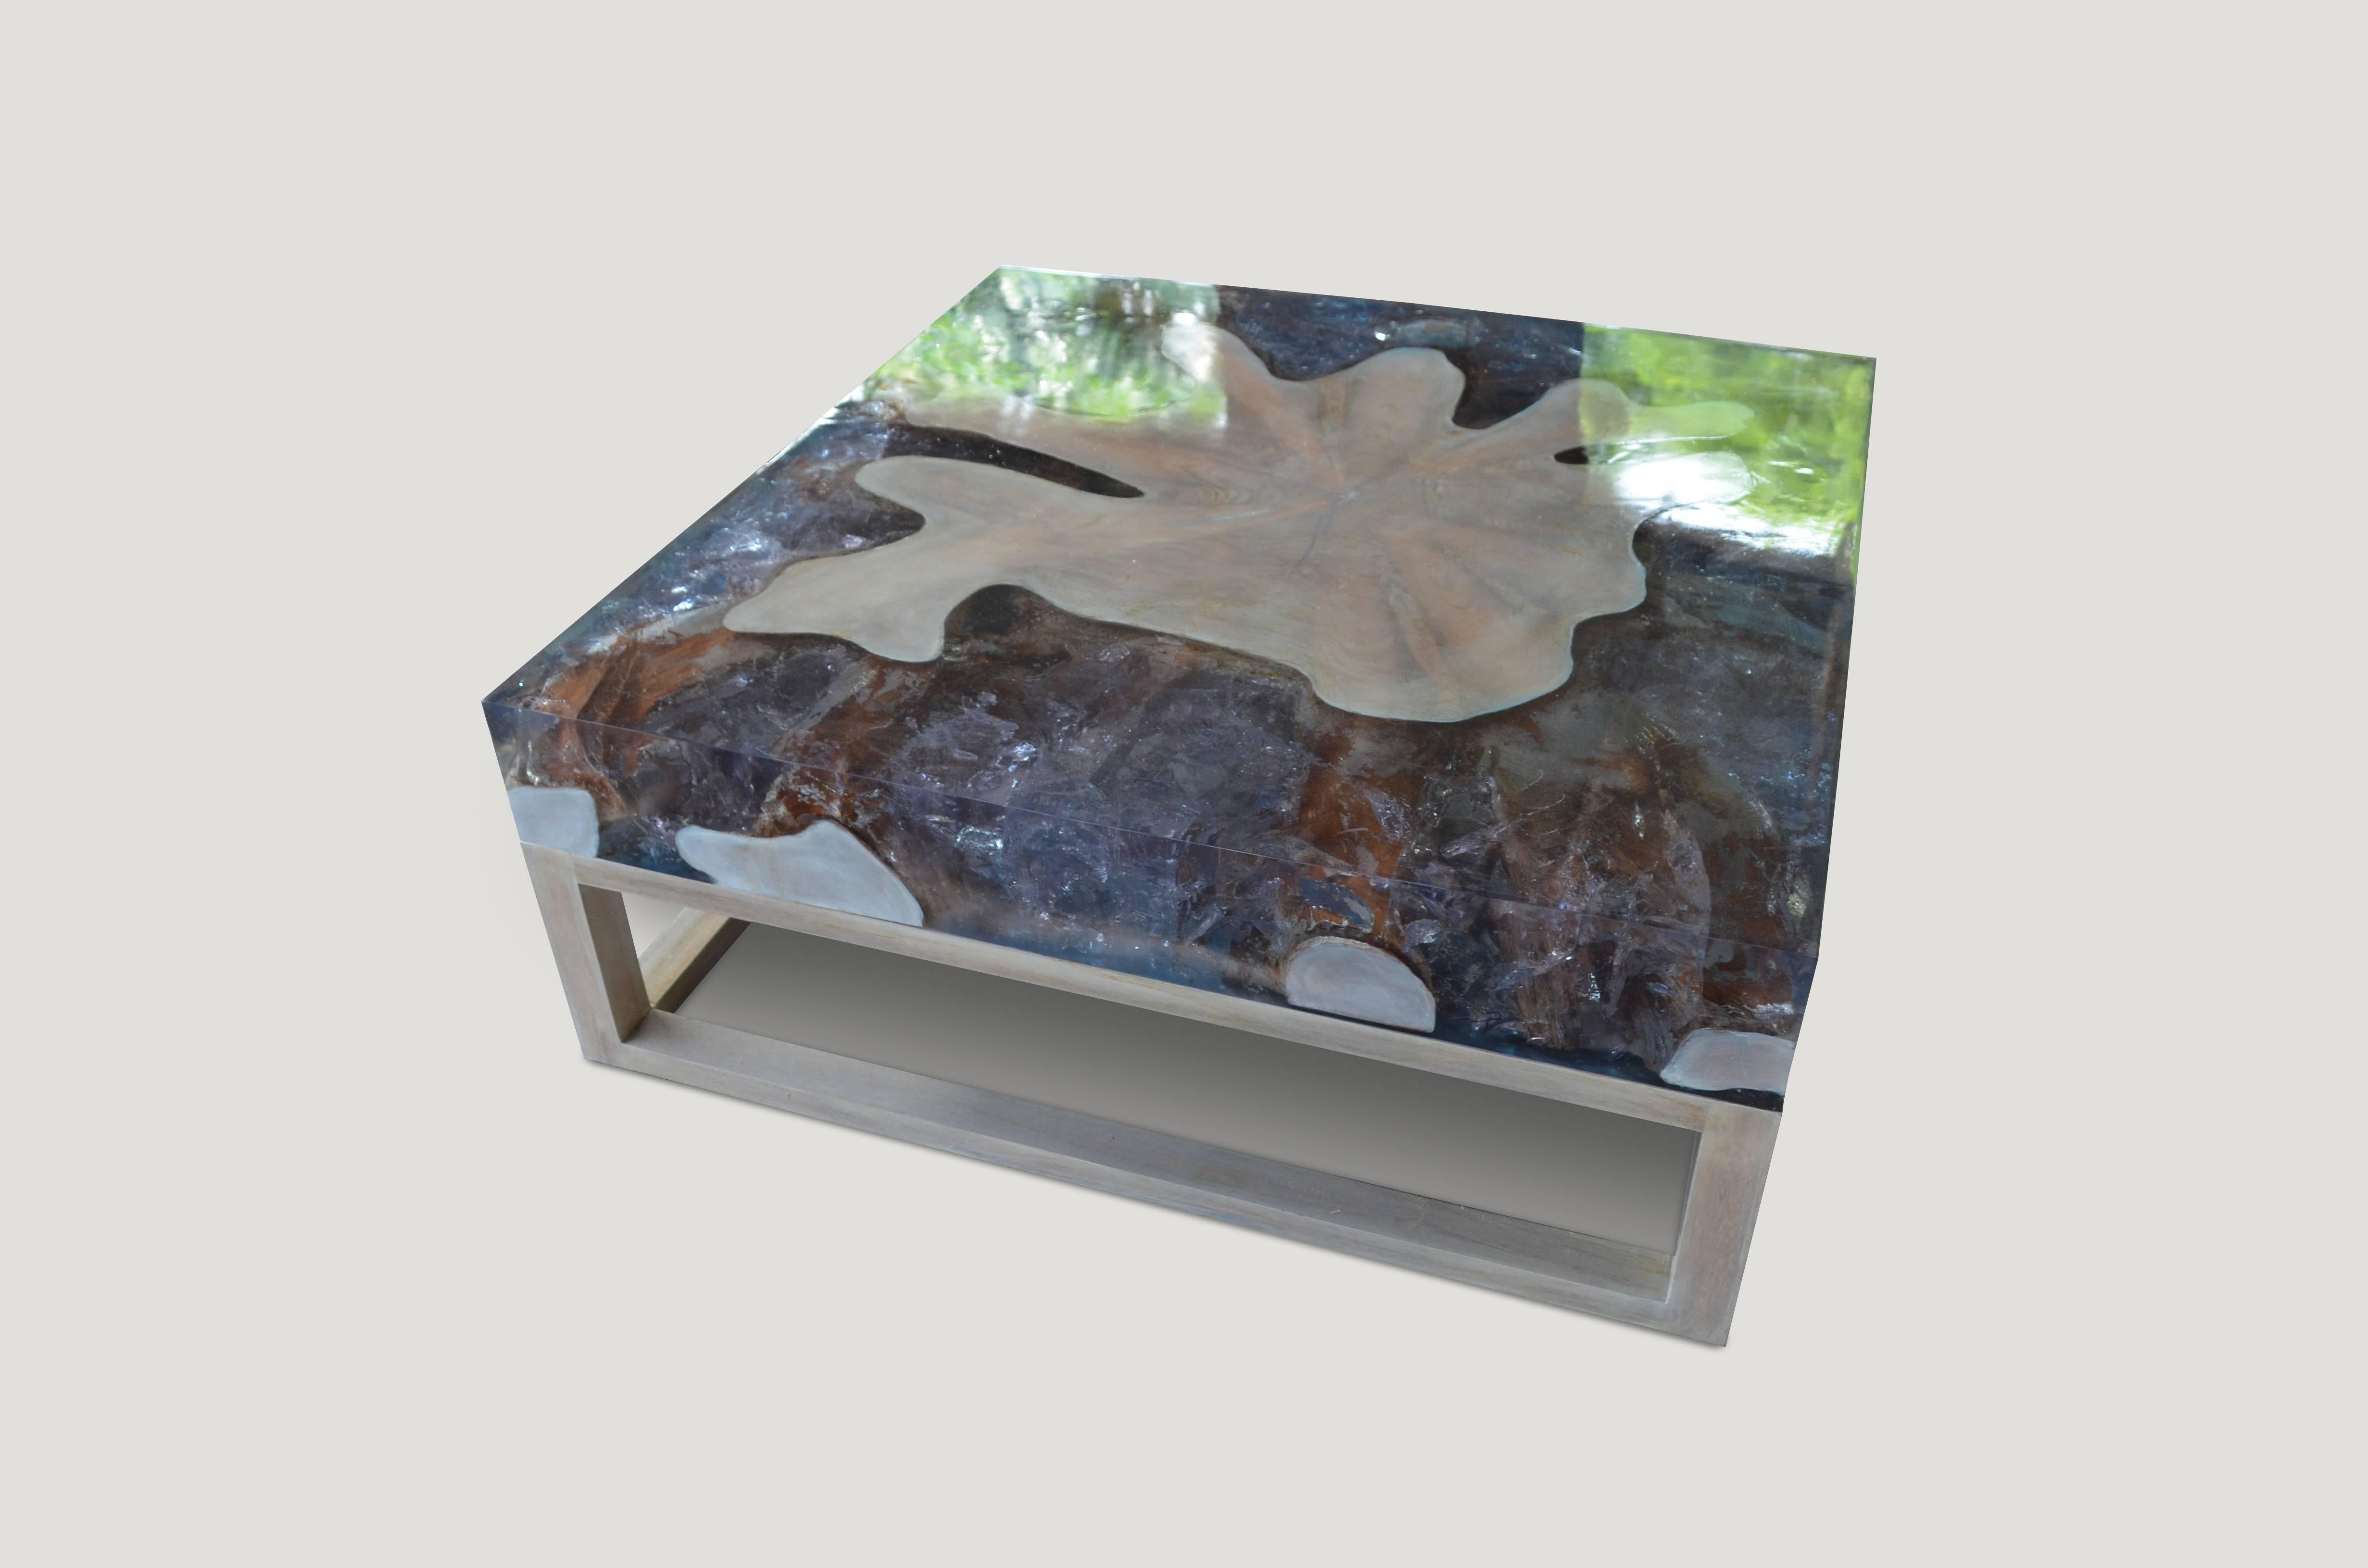 Andrianna Shamaris St. Barts Teak Wood and Cracked Resin Coffee Table In New Condition For Sale In New York, NY